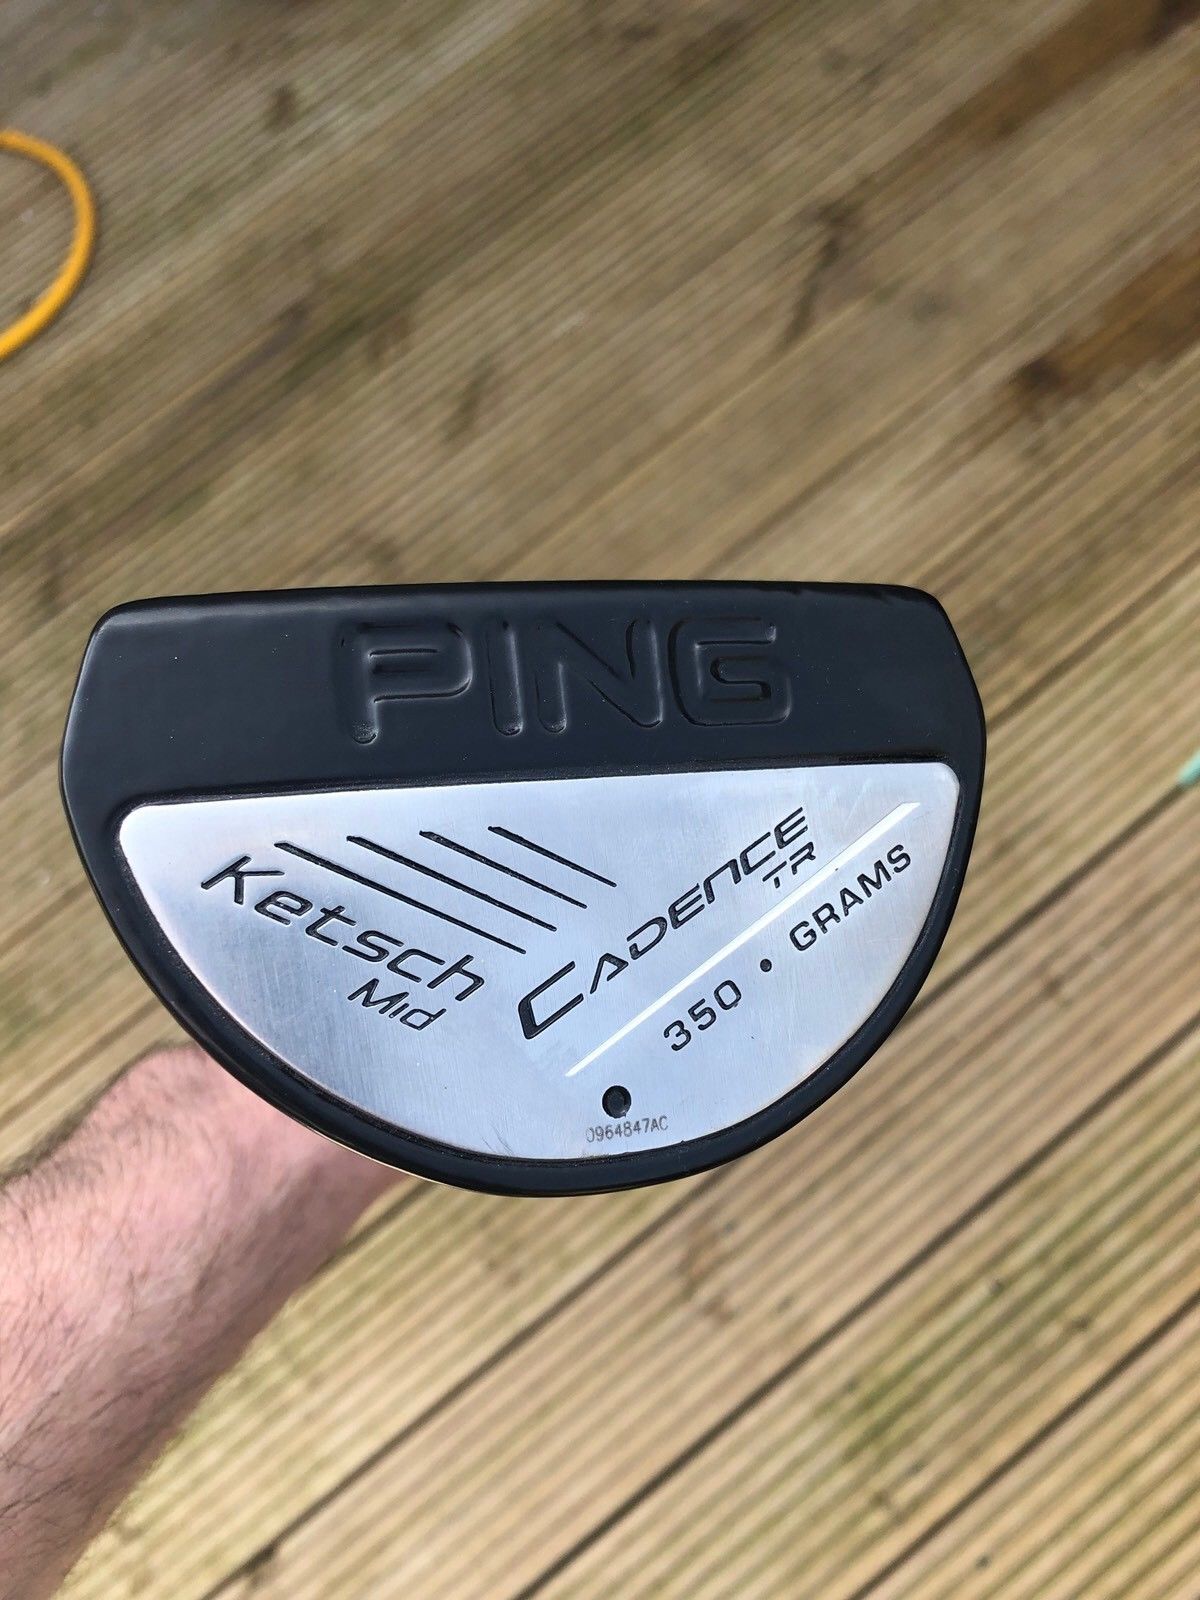 Cheap putters for sale on eBay, all going for less than £30